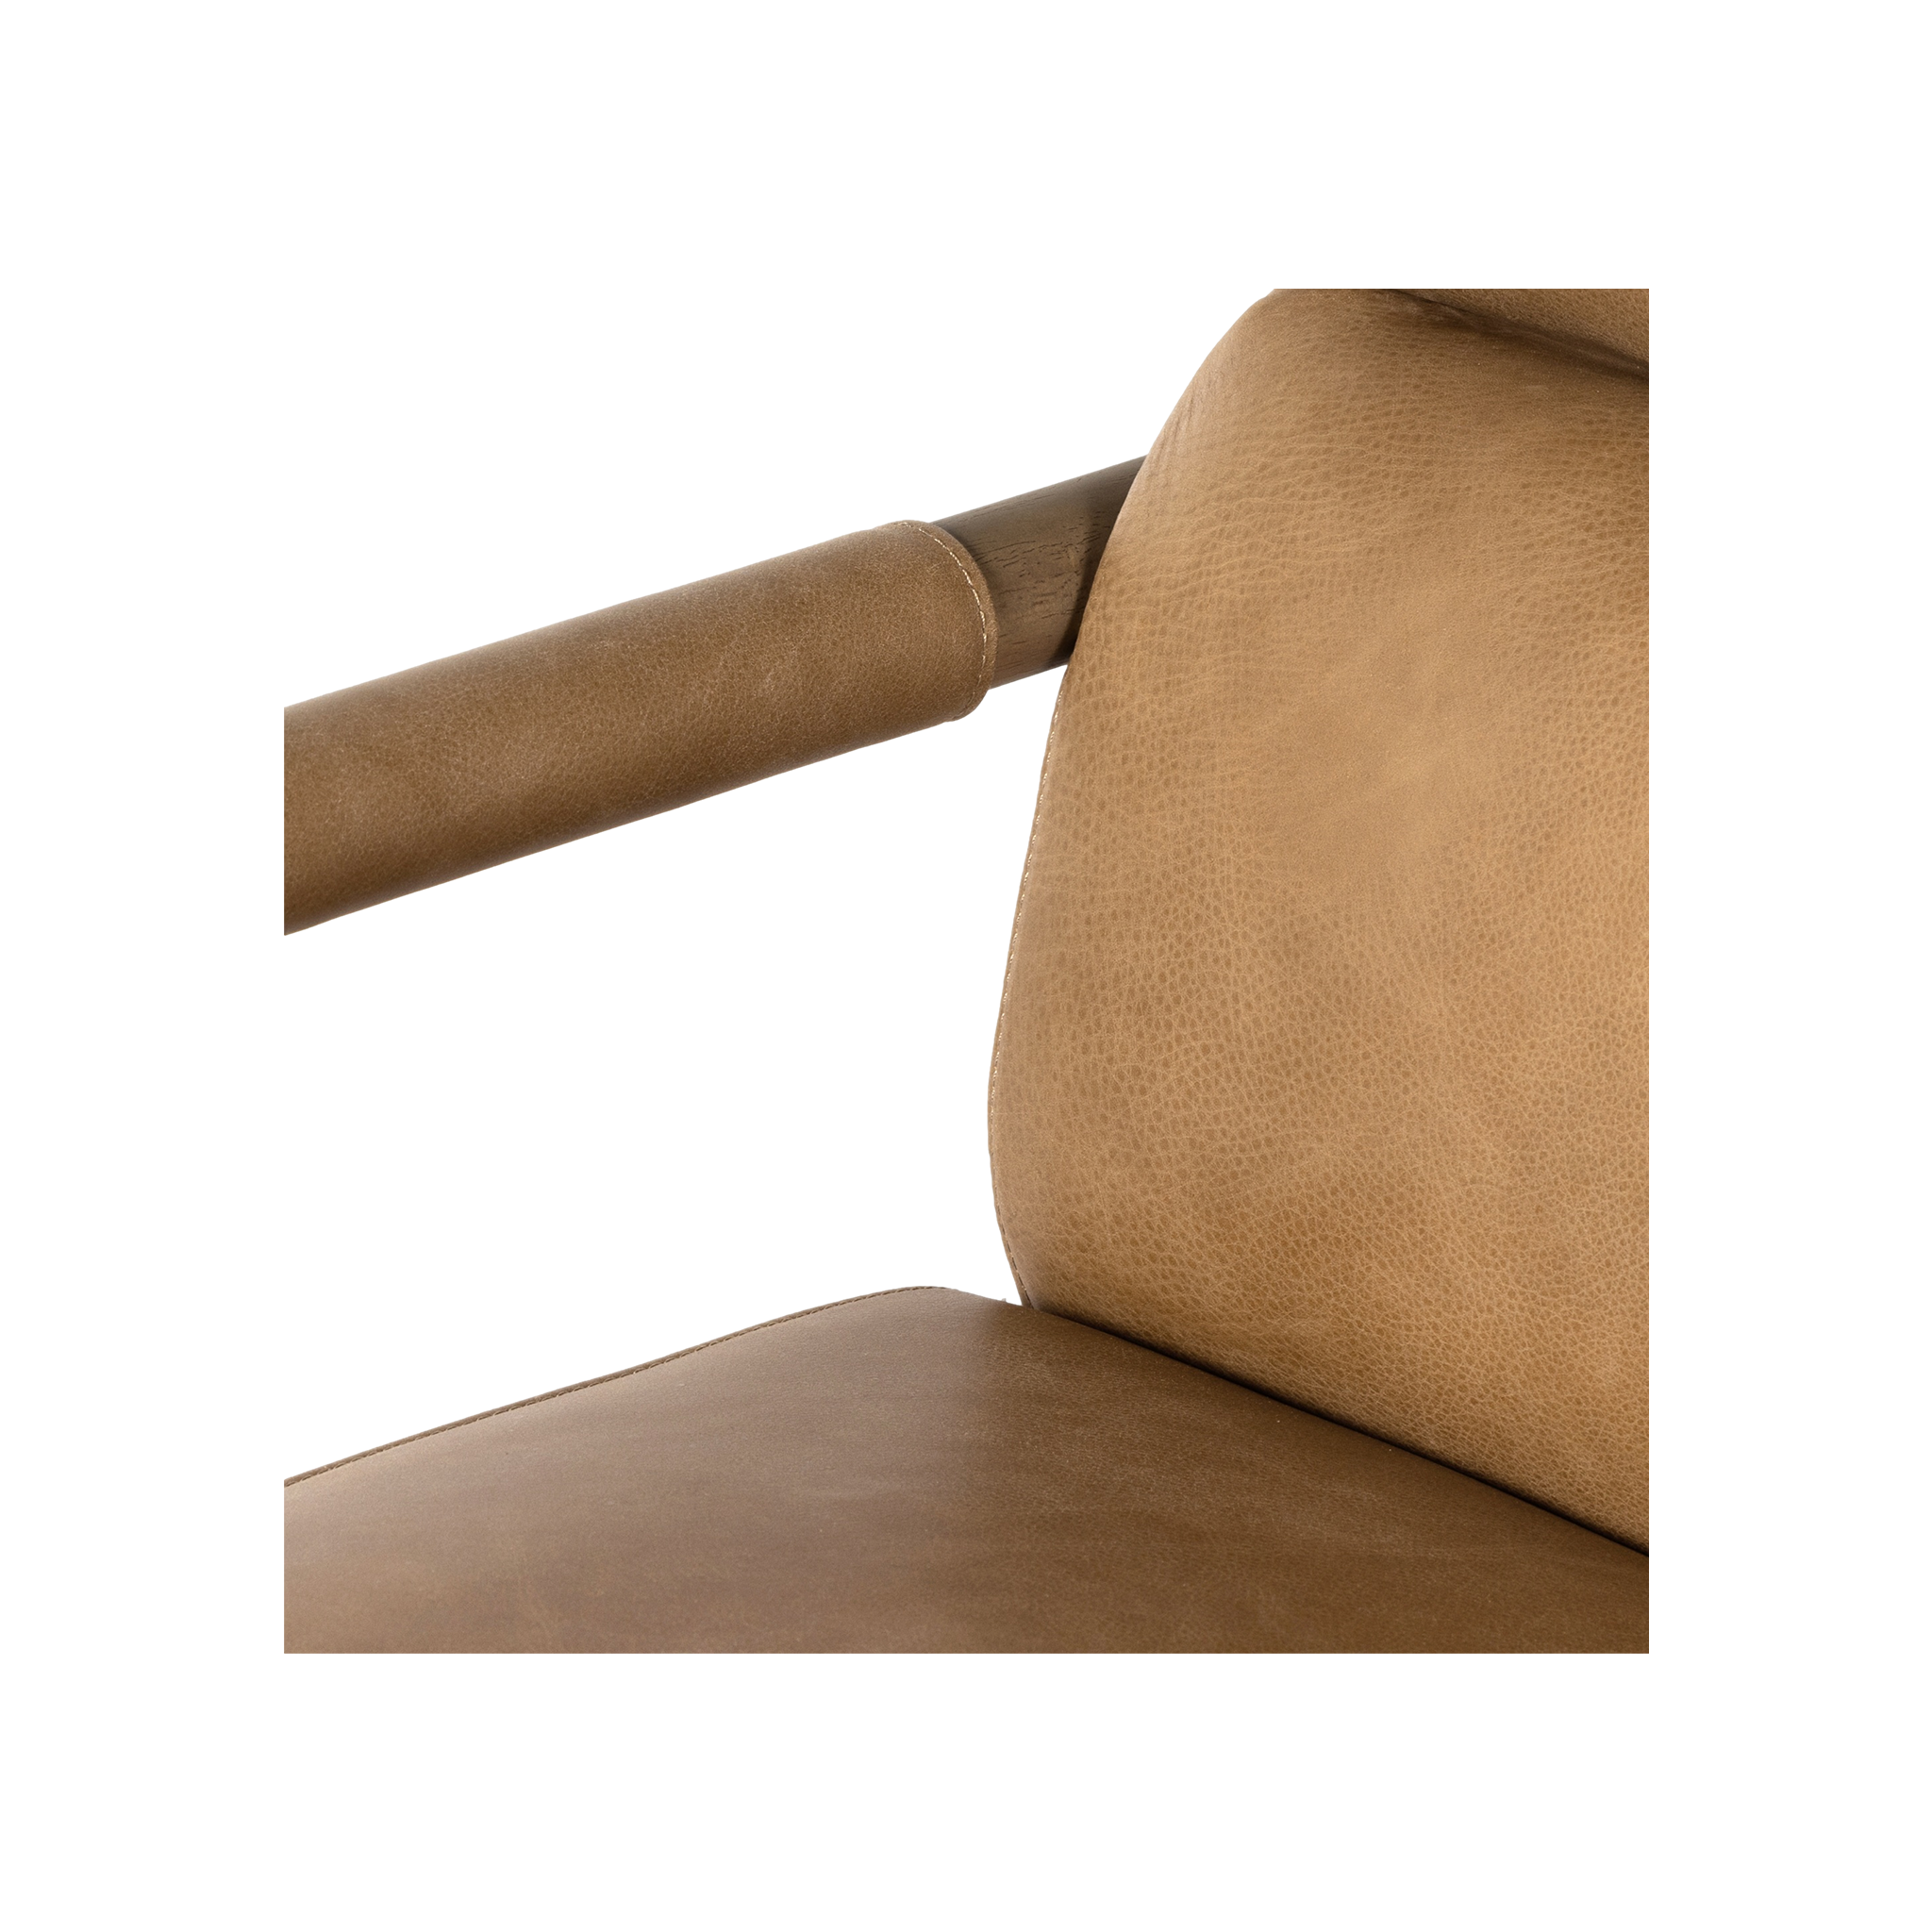 Kiano Dining Armchair in Palermo Drift